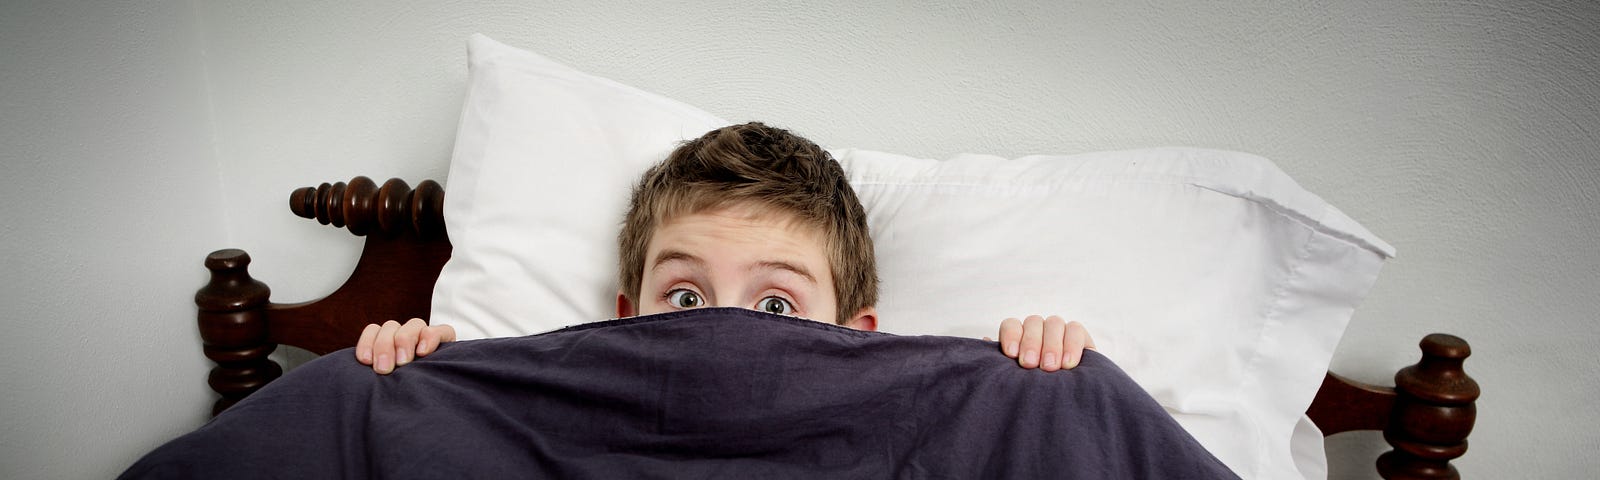 Young boy in bed, peeking over his blanket in fear